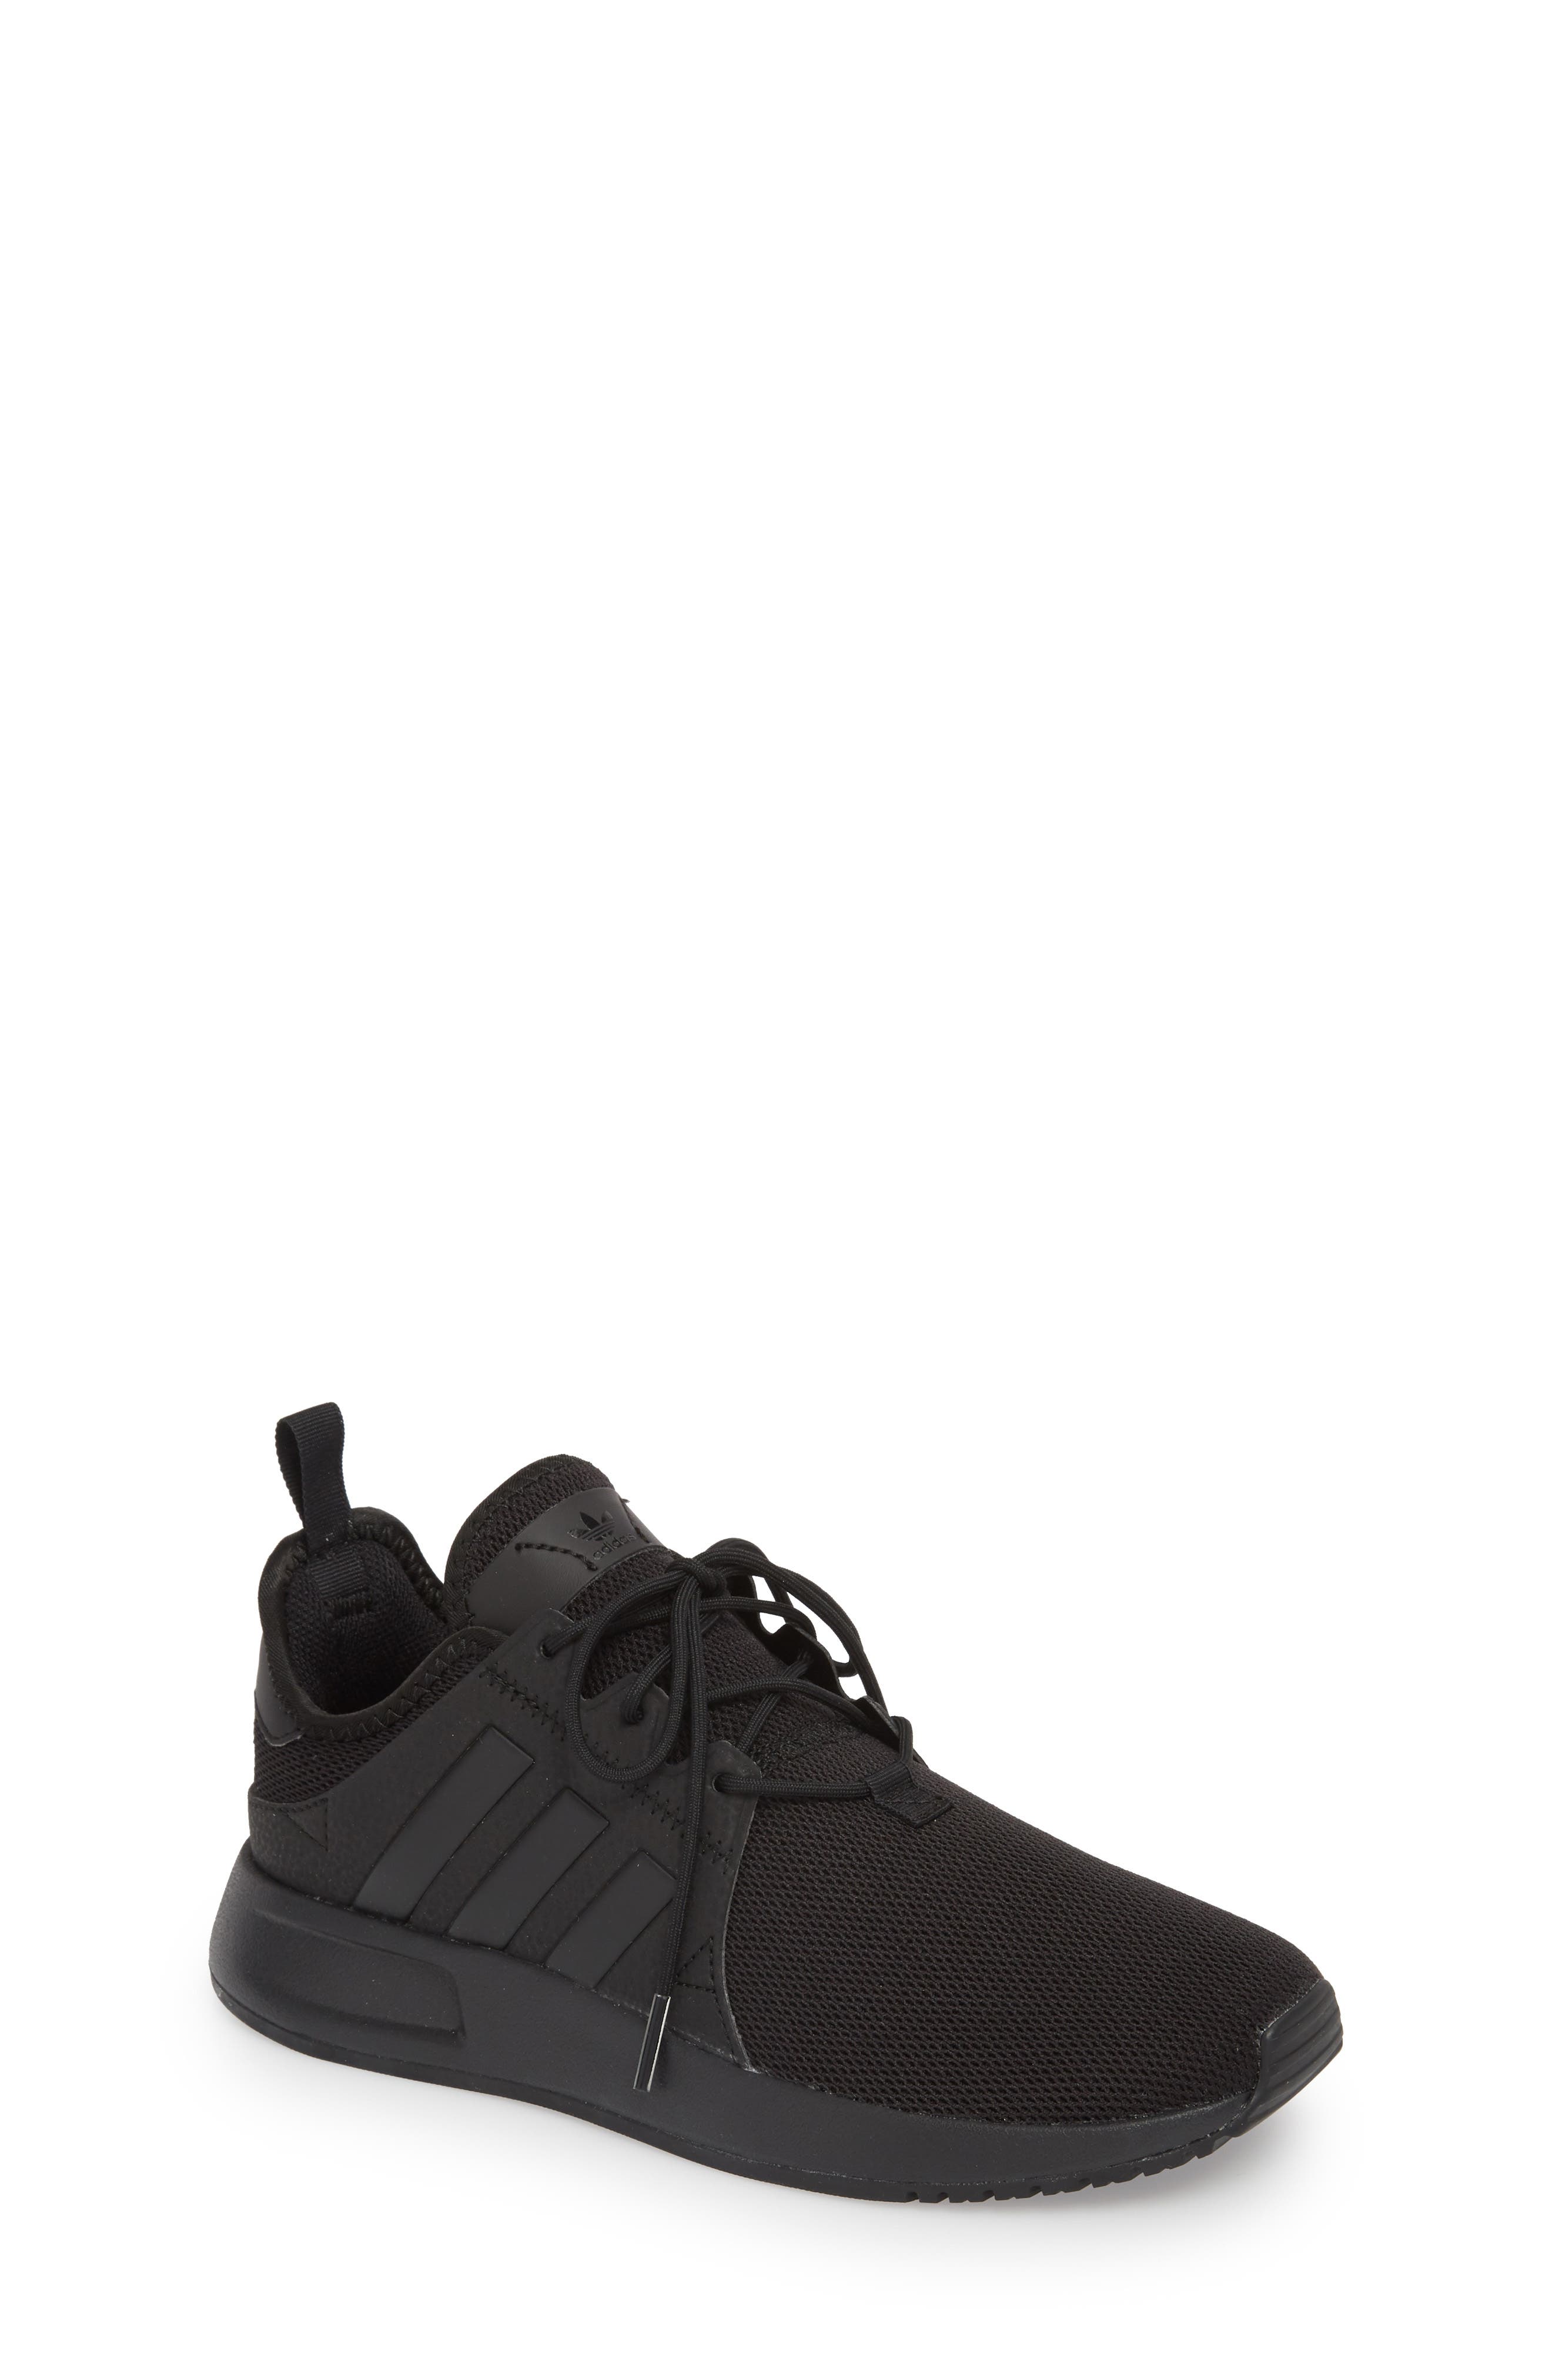 Boys adidas' Shoes Sale | Nordstrom